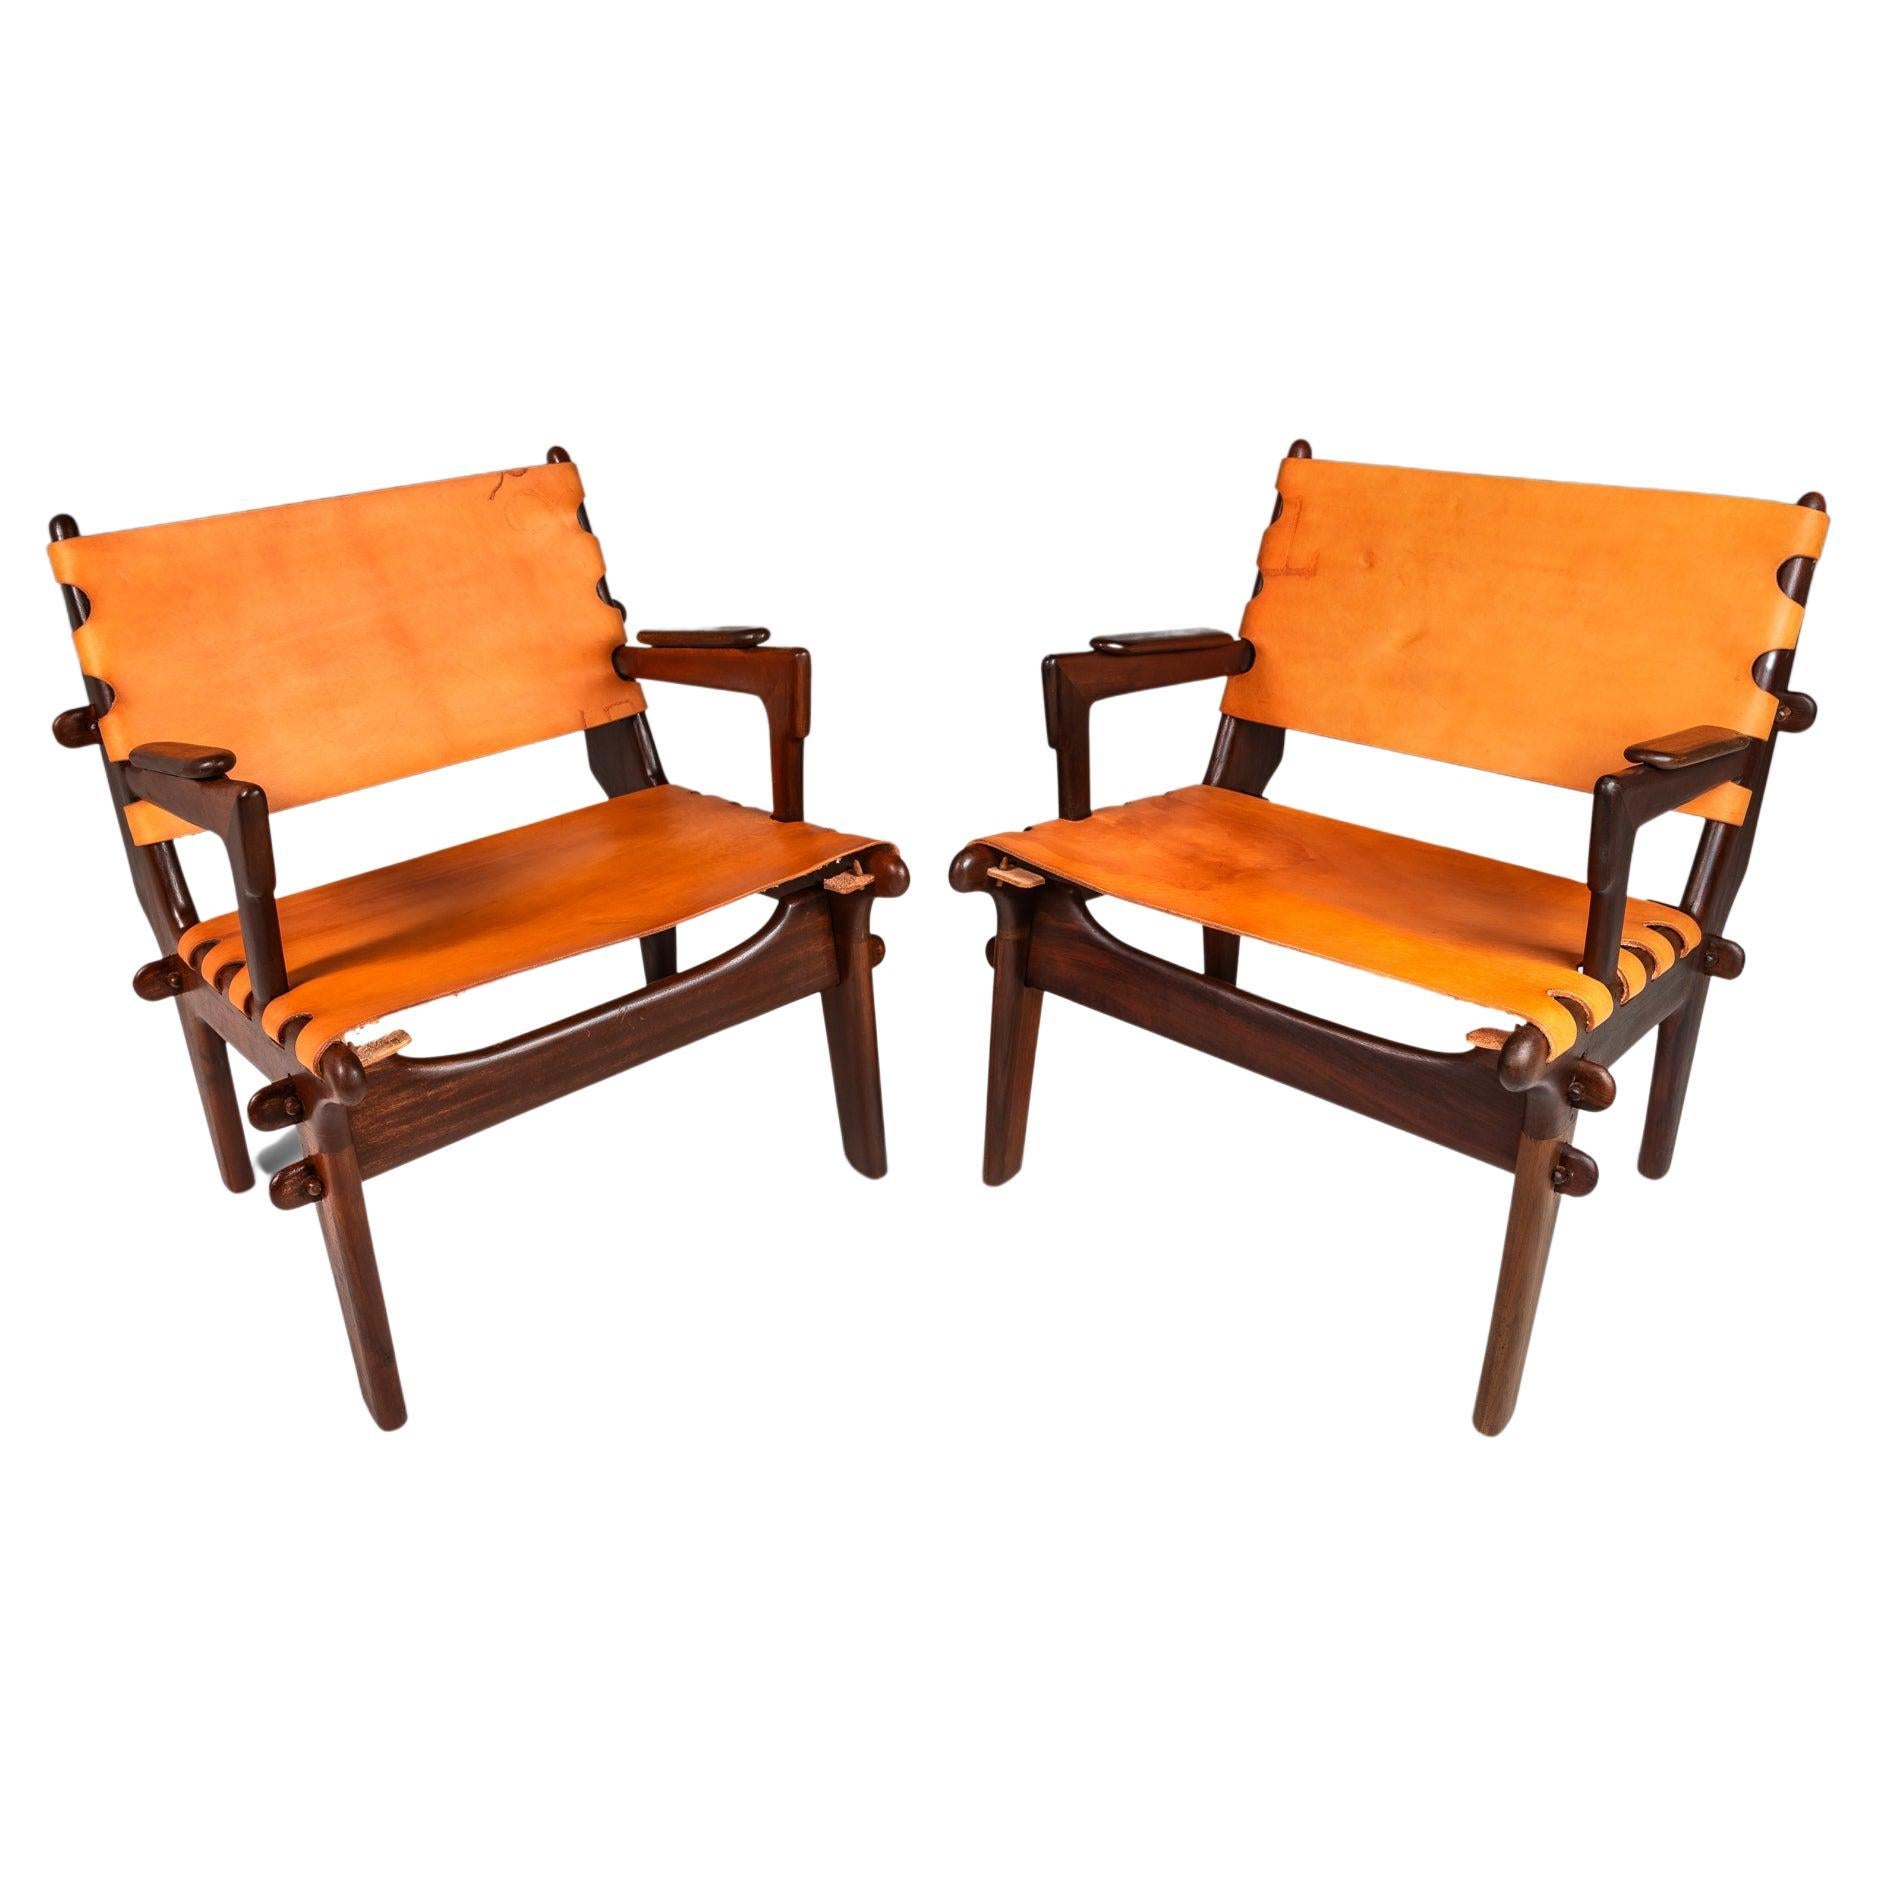 Set of 2 Tooled Leather Sling Lounge Chairs by Angel Pazmino, Ecuador, c. 1960's For Sale